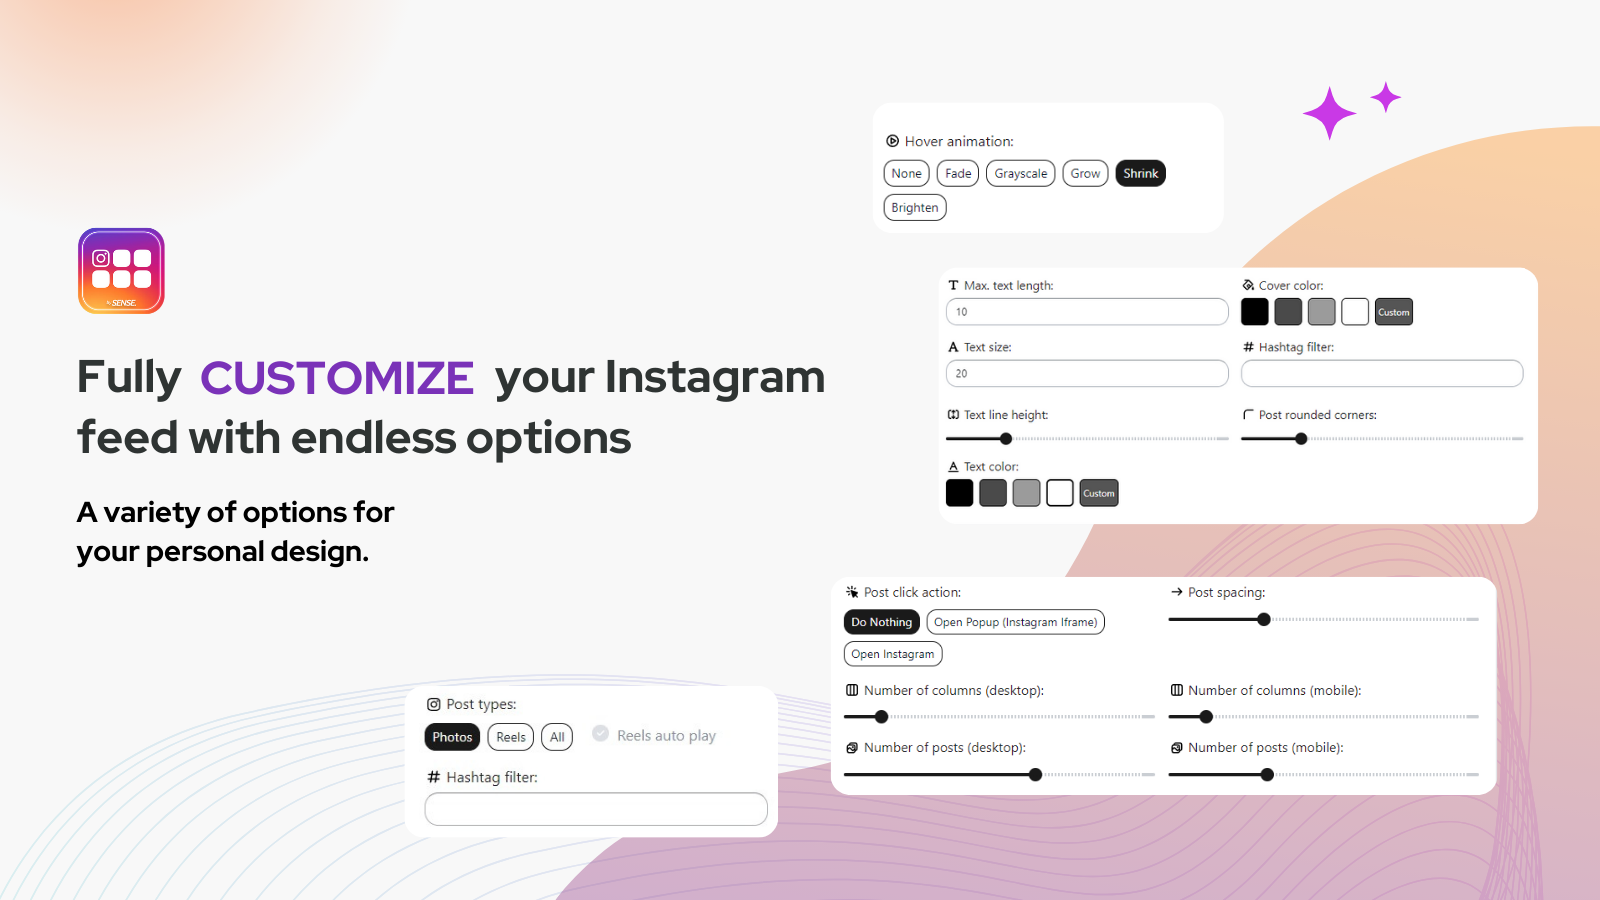 Fully customize your Instagram feed with 